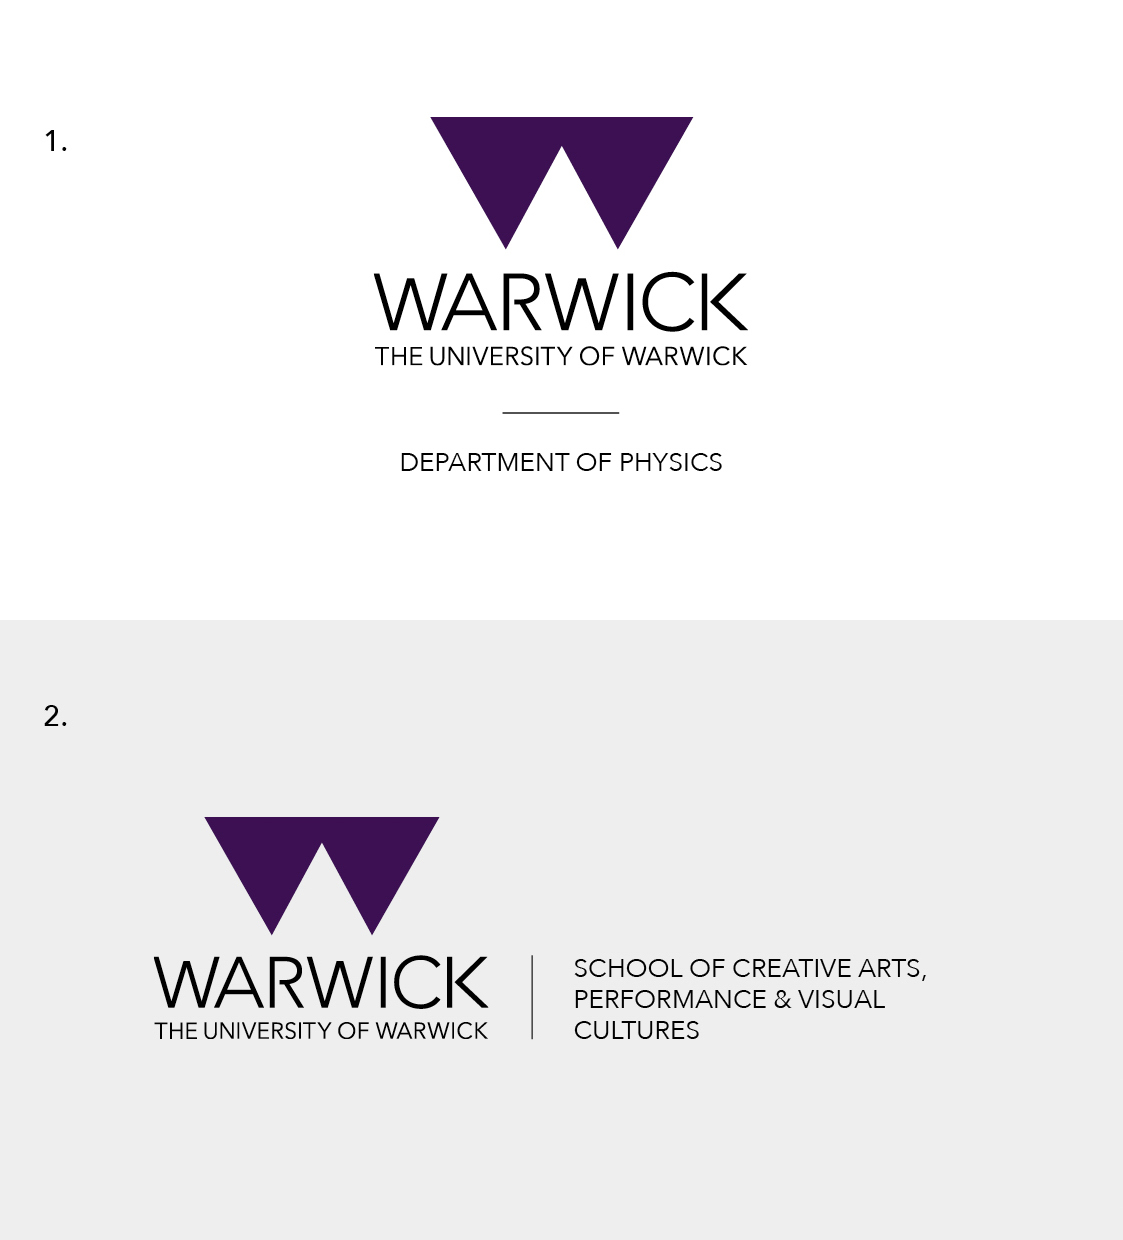 We have two options for departmental logos